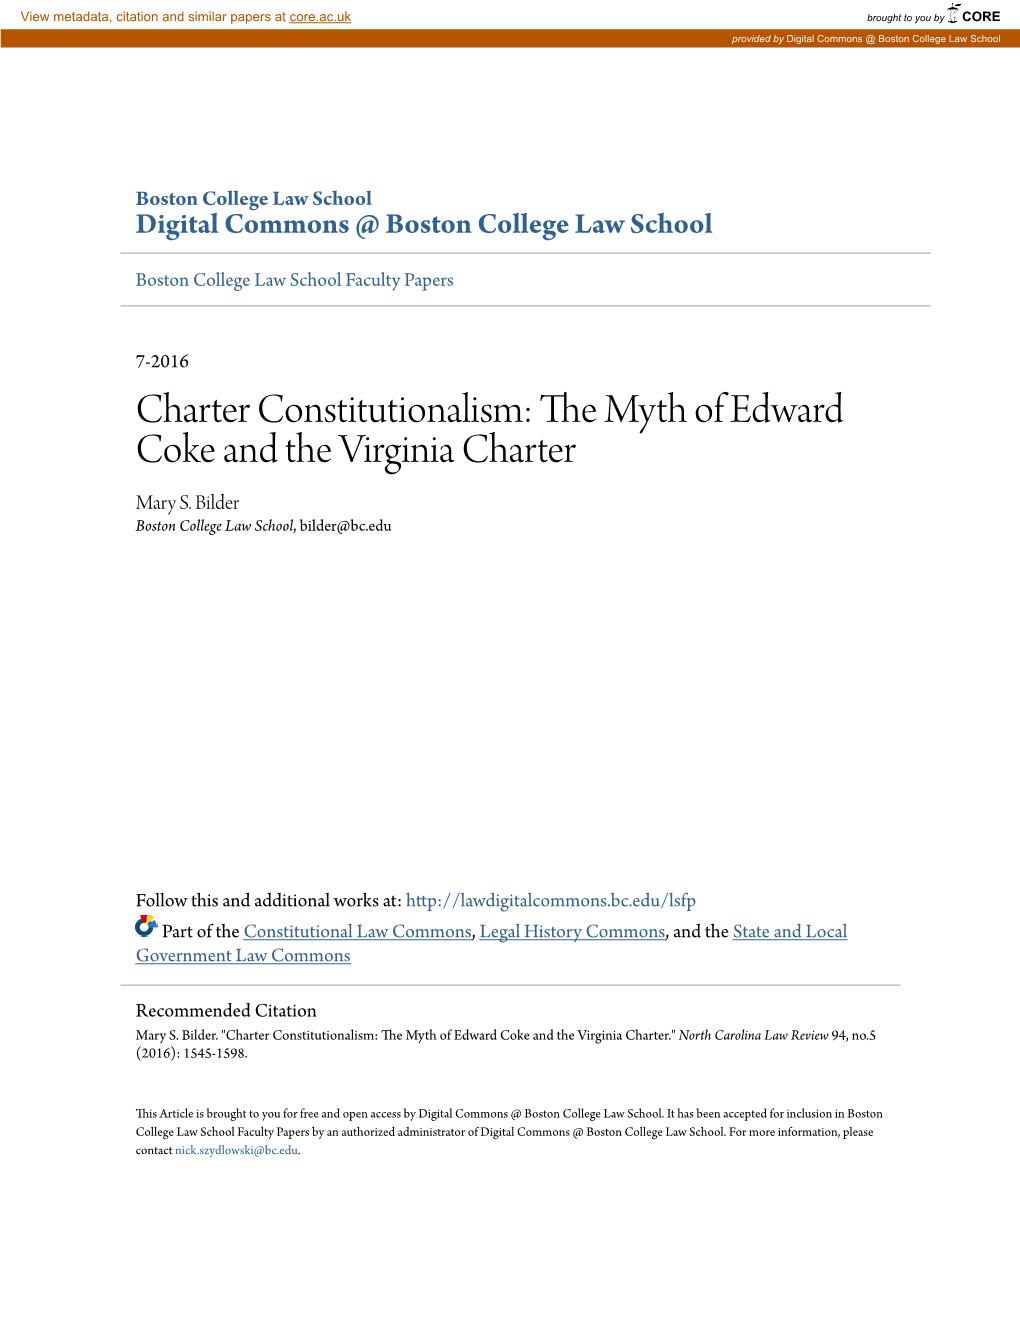 The Myth of Edward Coke and the Virginia Charter*